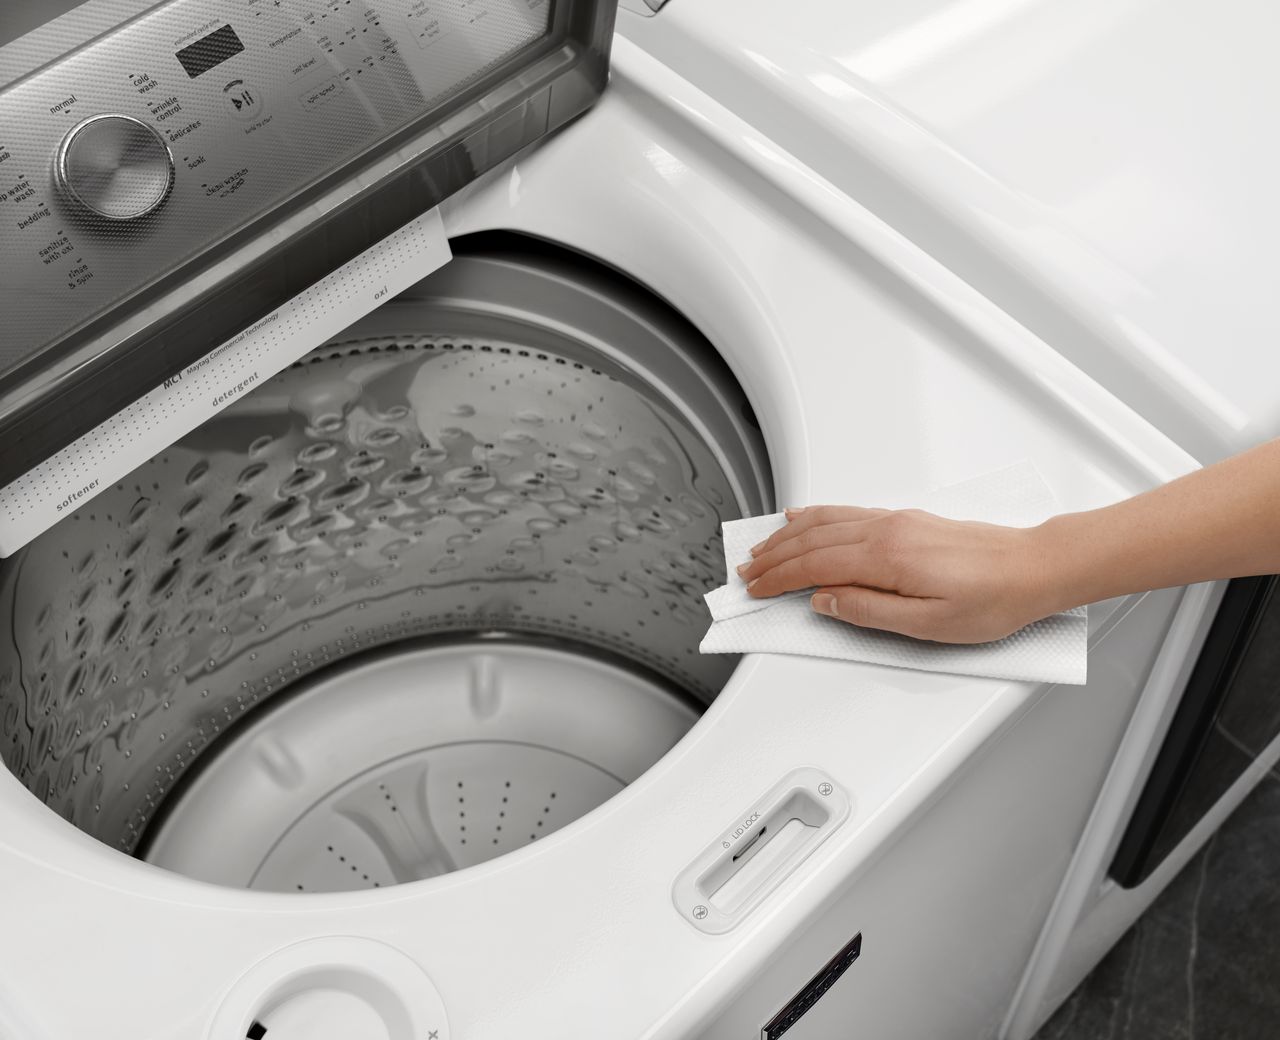 How to Deep Clean Your Top Load Washer